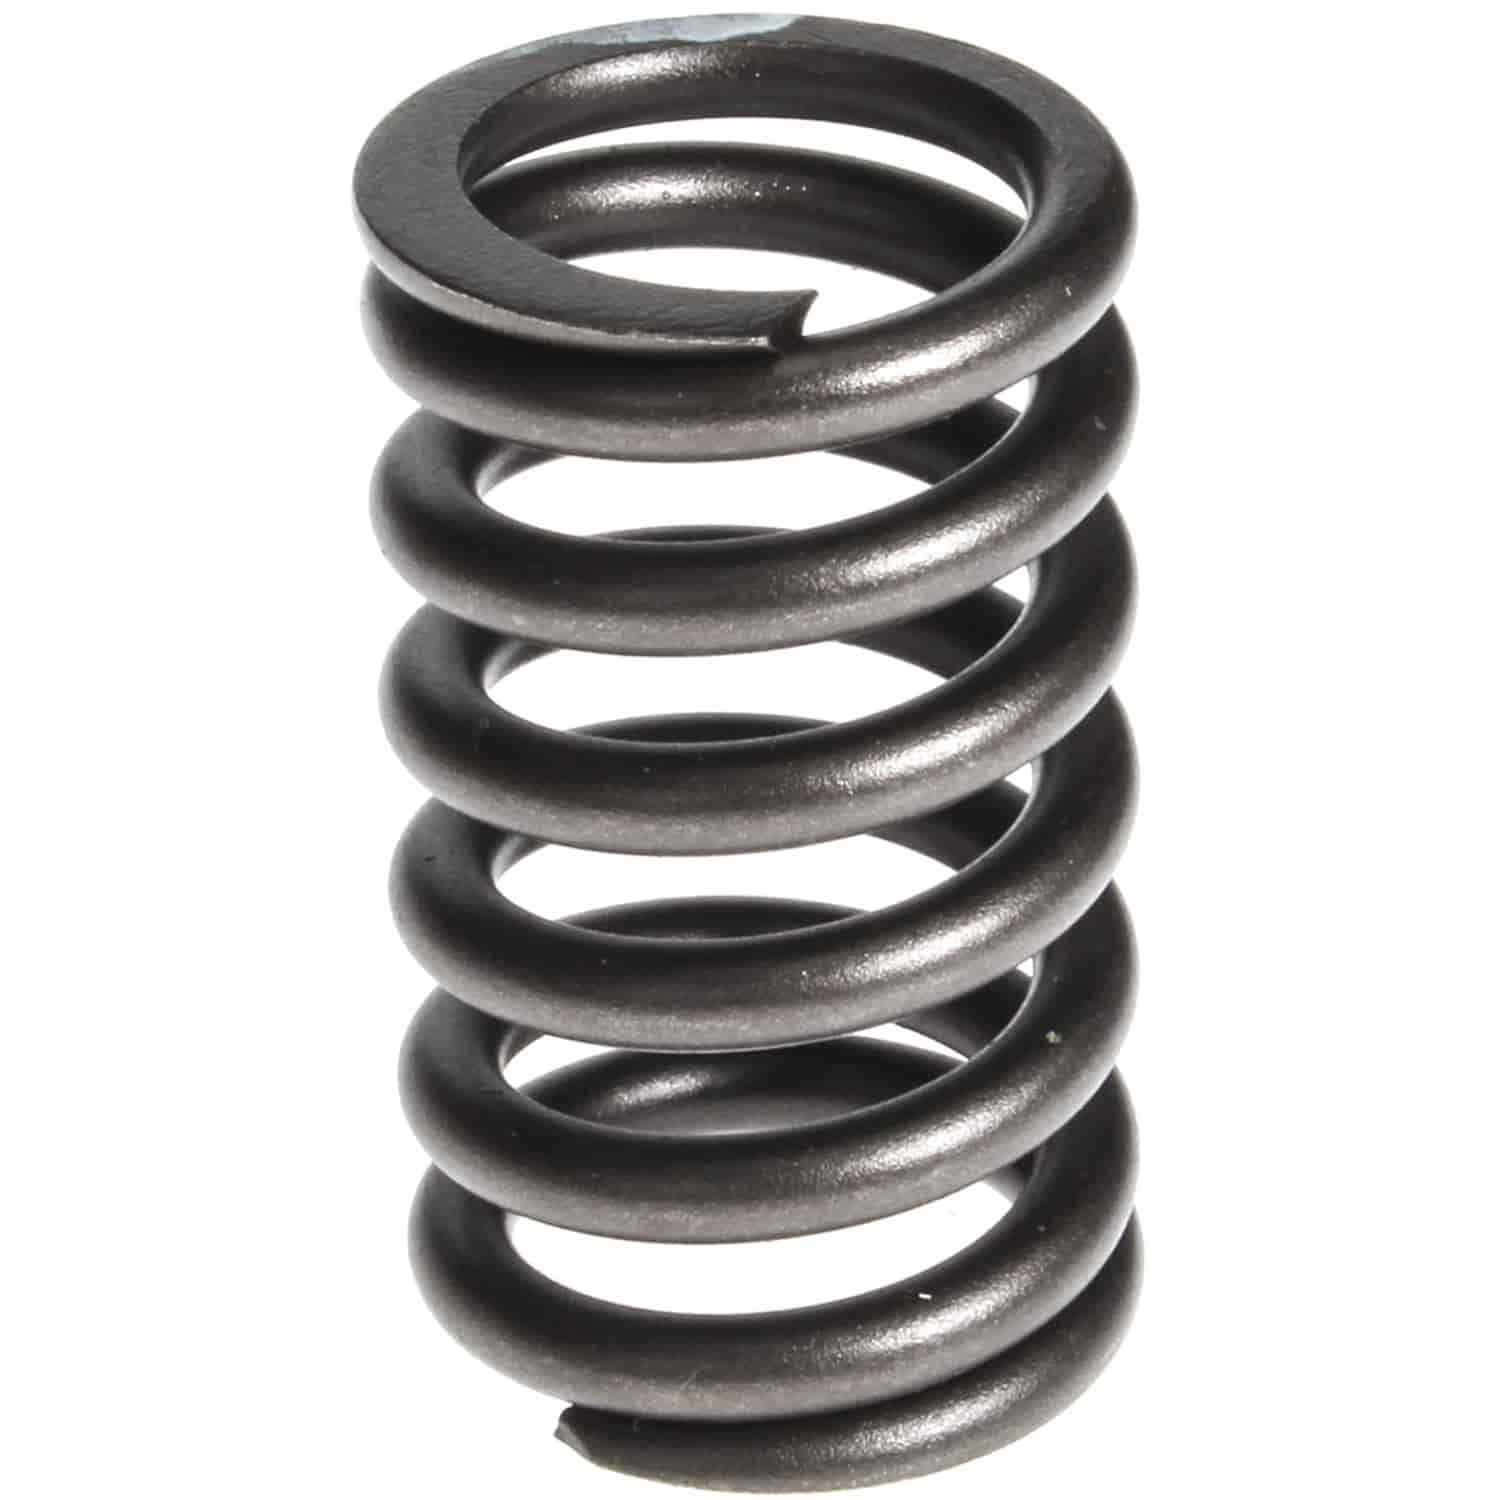 Valve Springs for Cummins B Series 4 and 6 Cylinder Engines